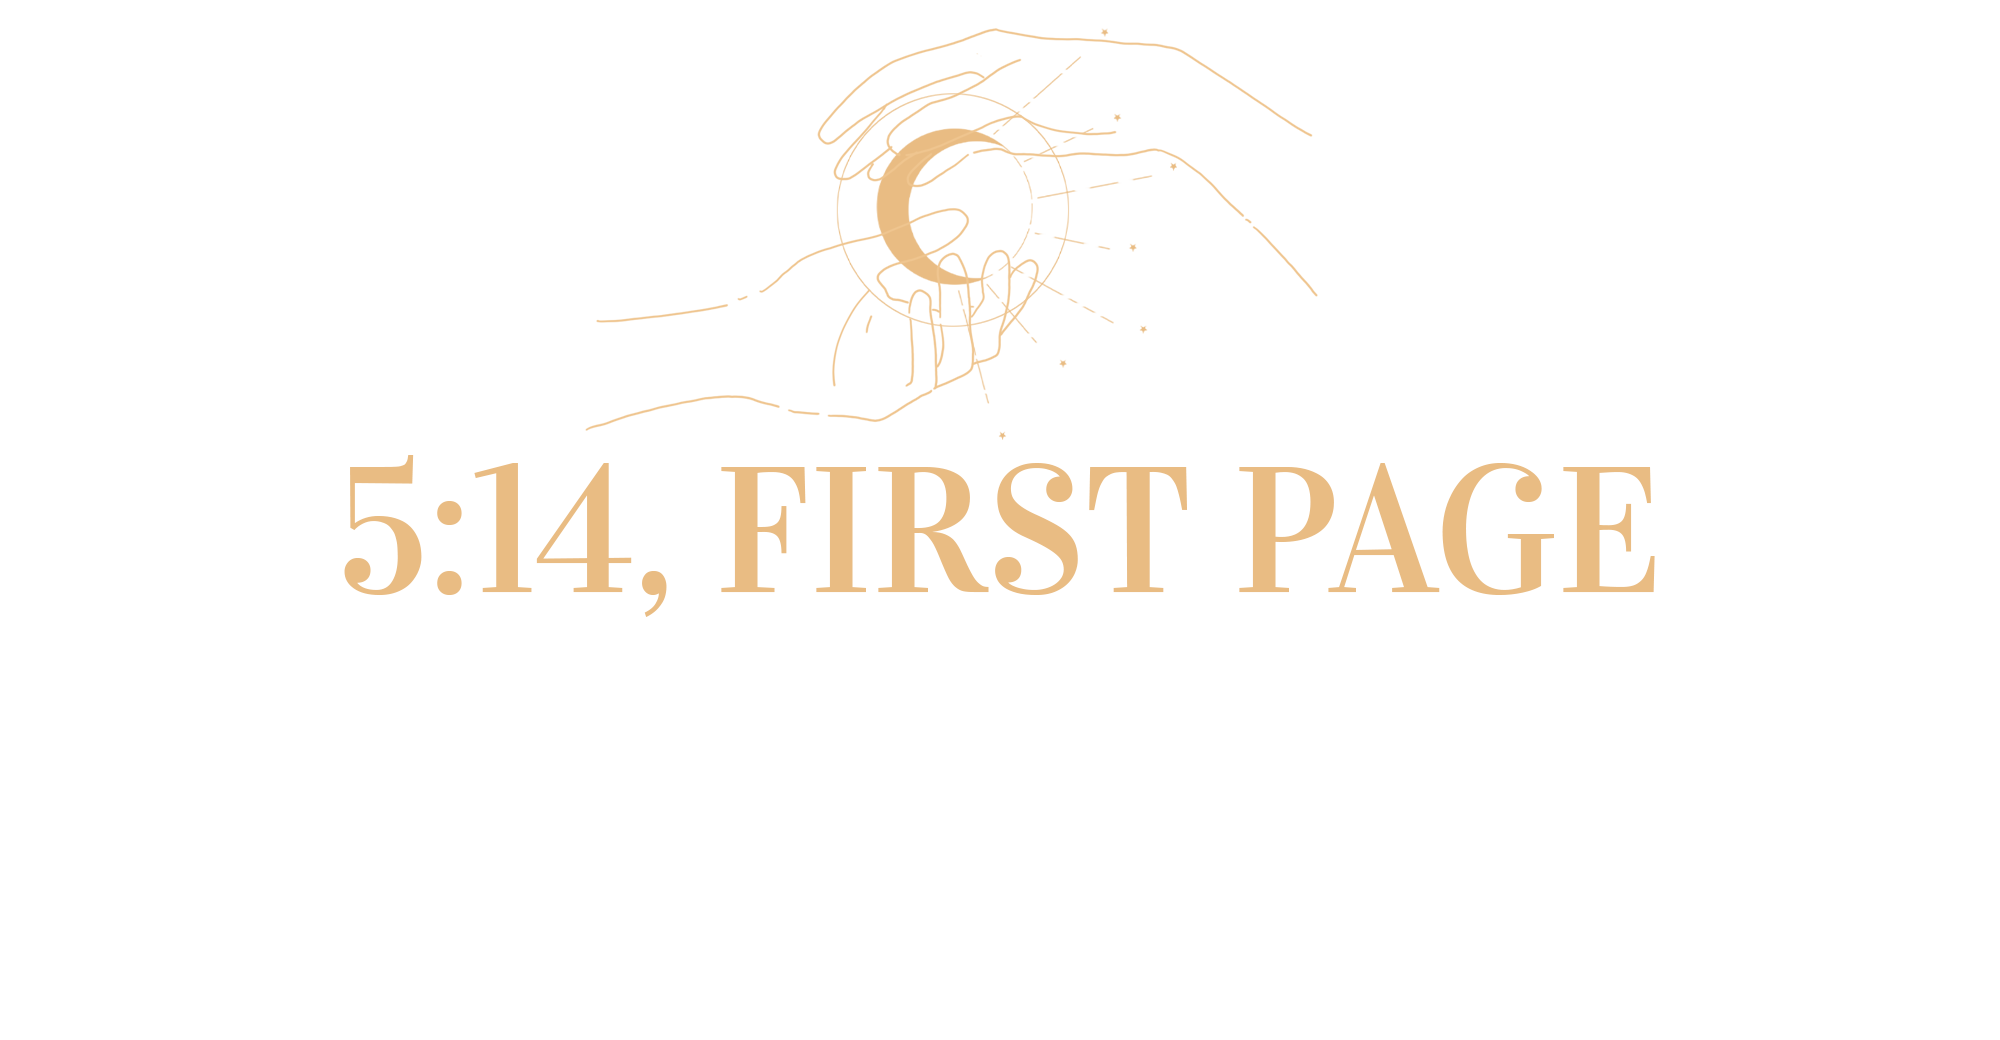 5:14, First Page [Demo Version]